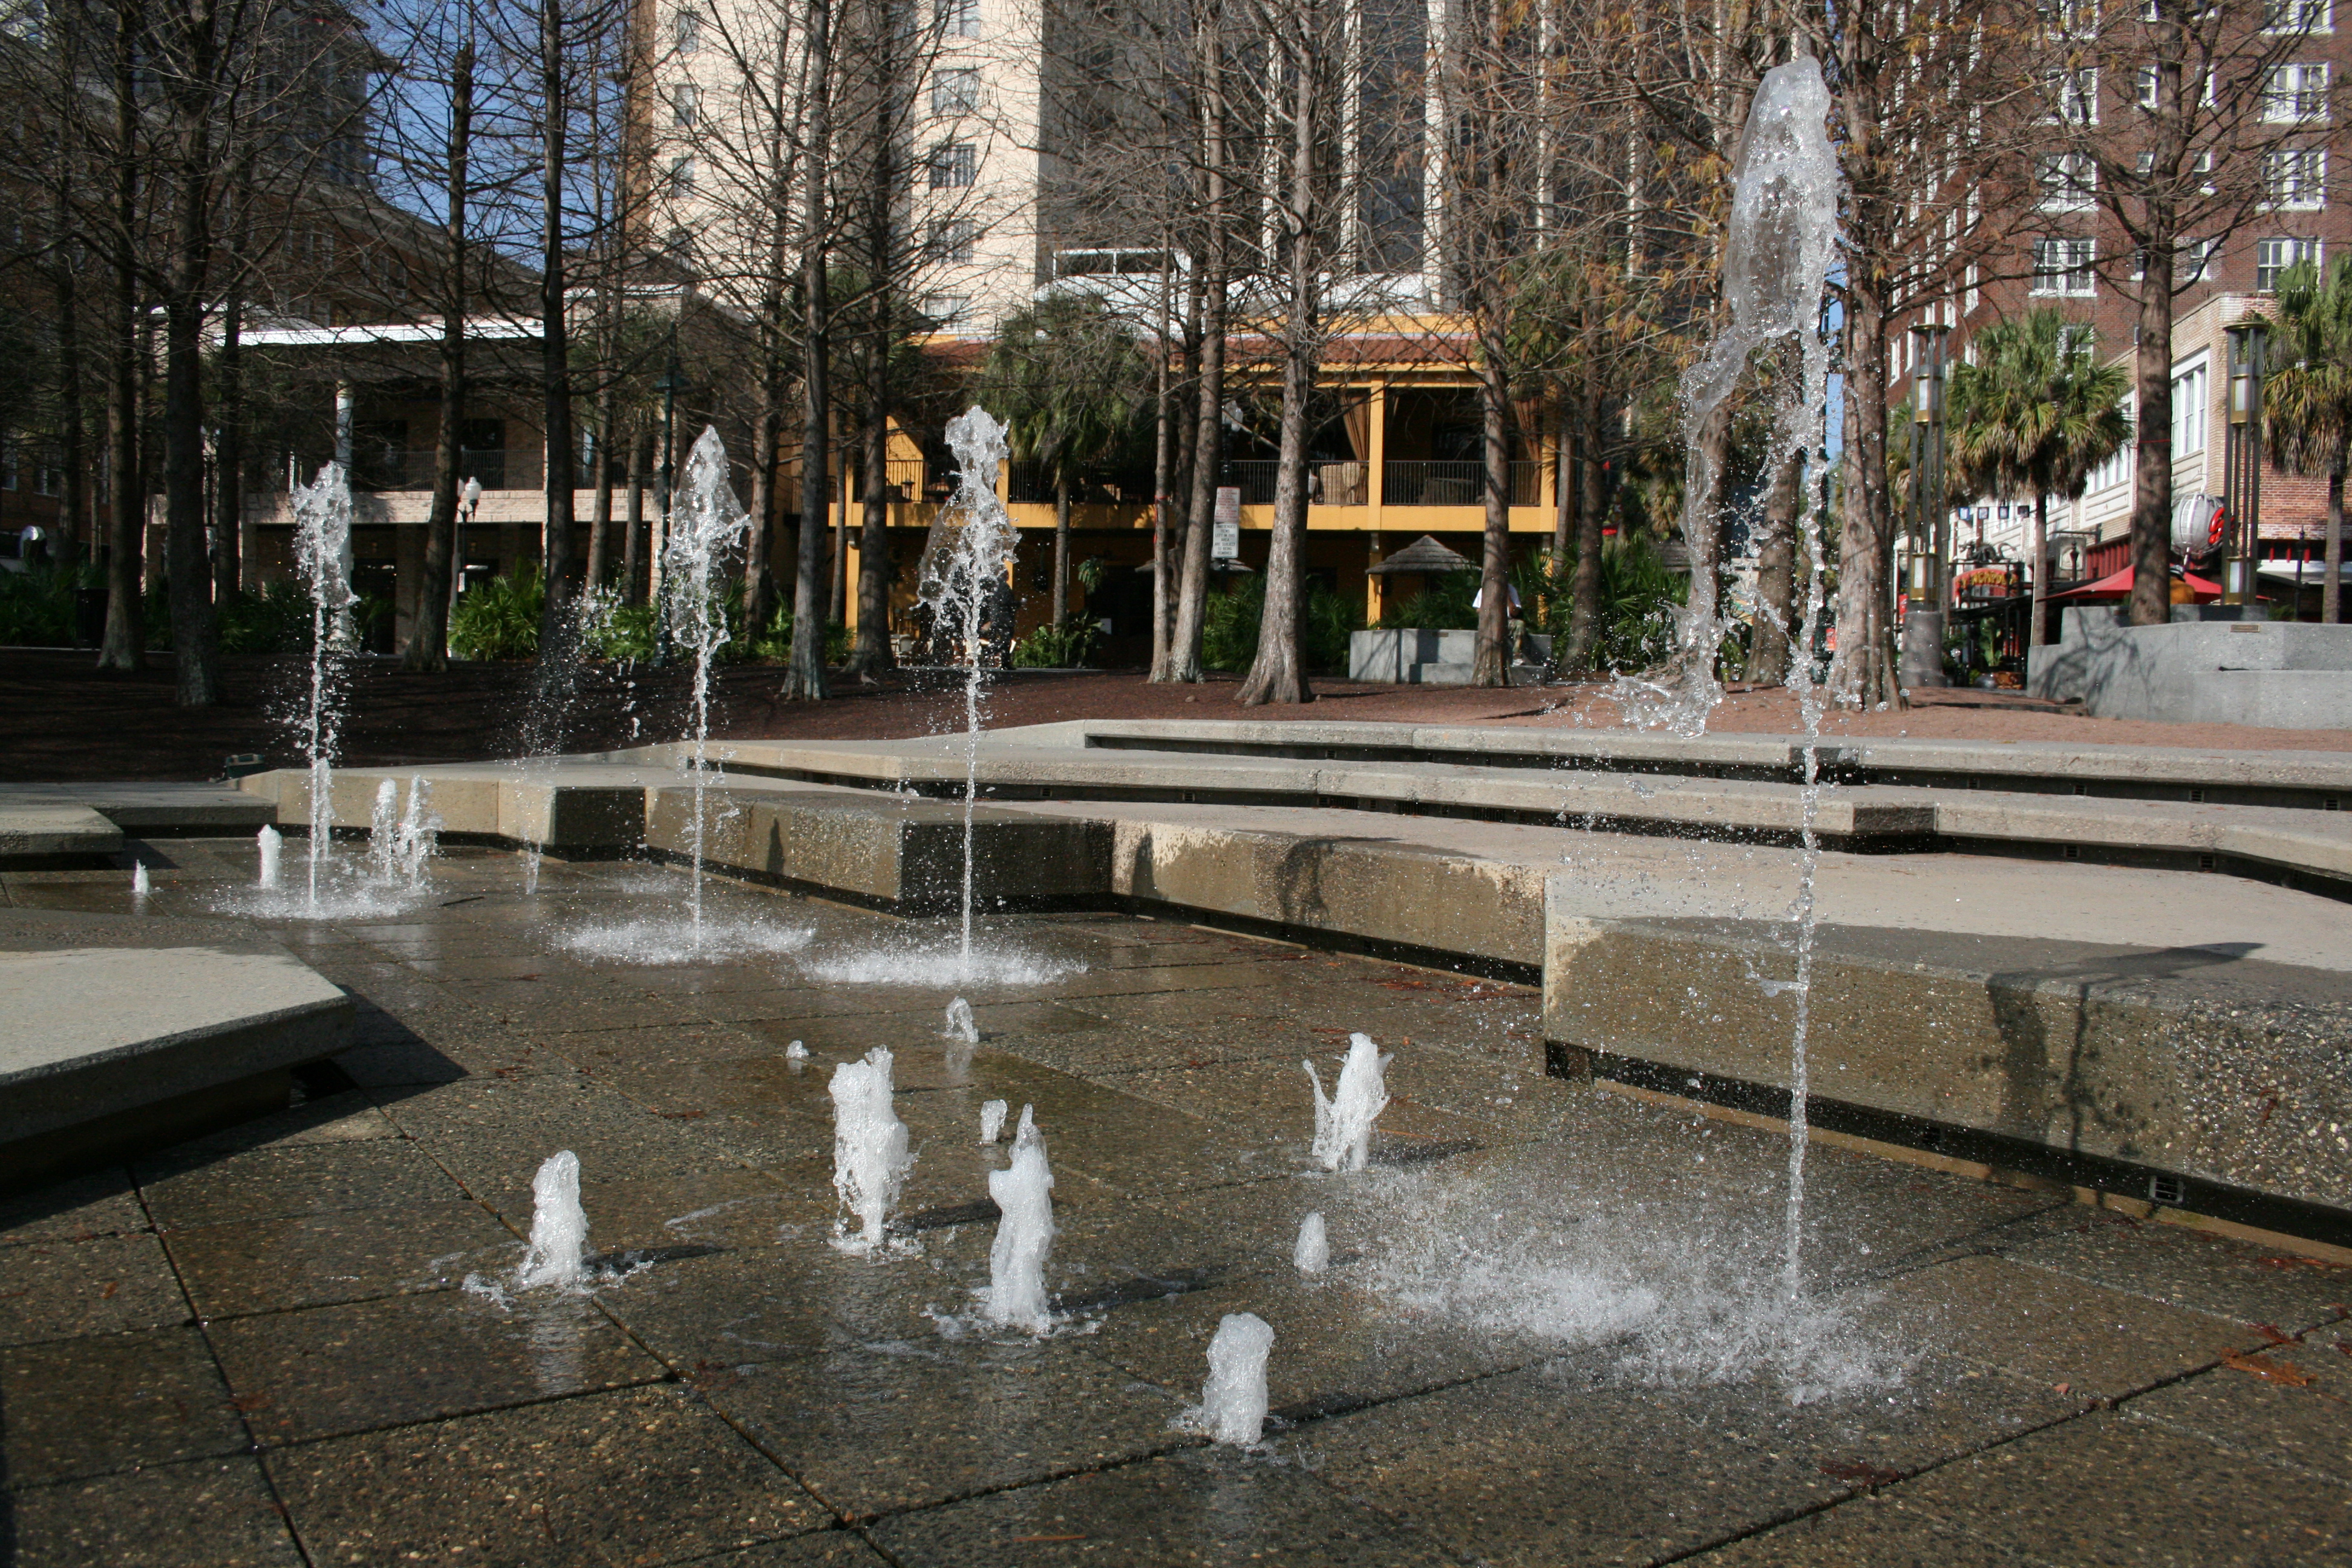 Orange County Regional History Center Interactive Water Feature